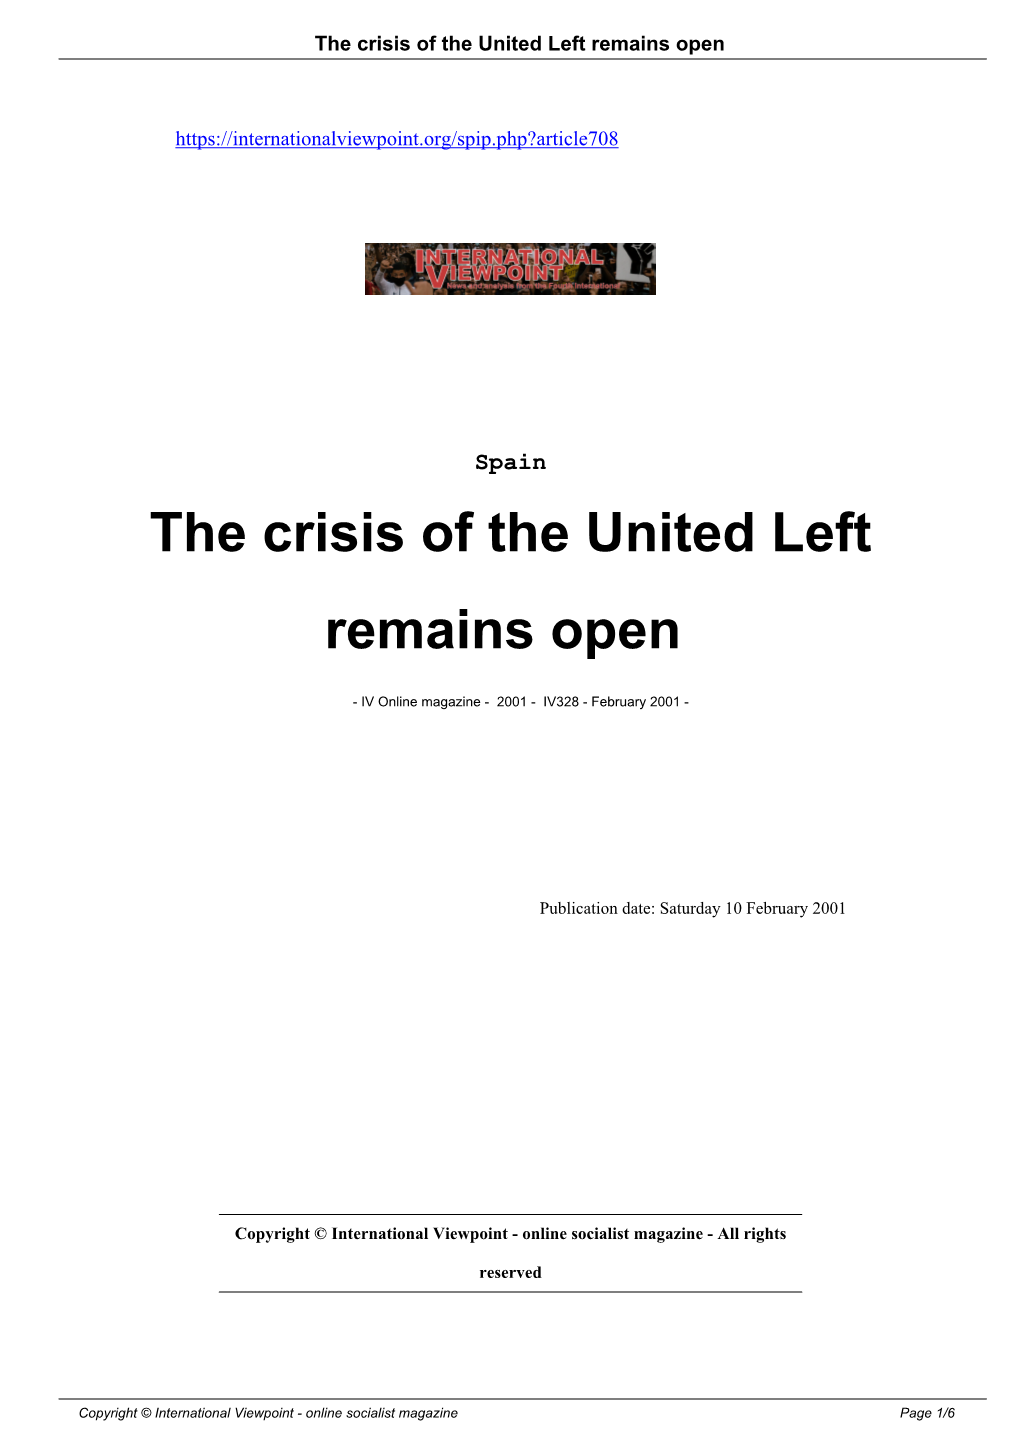 The Crisis of the United Left Remains Open